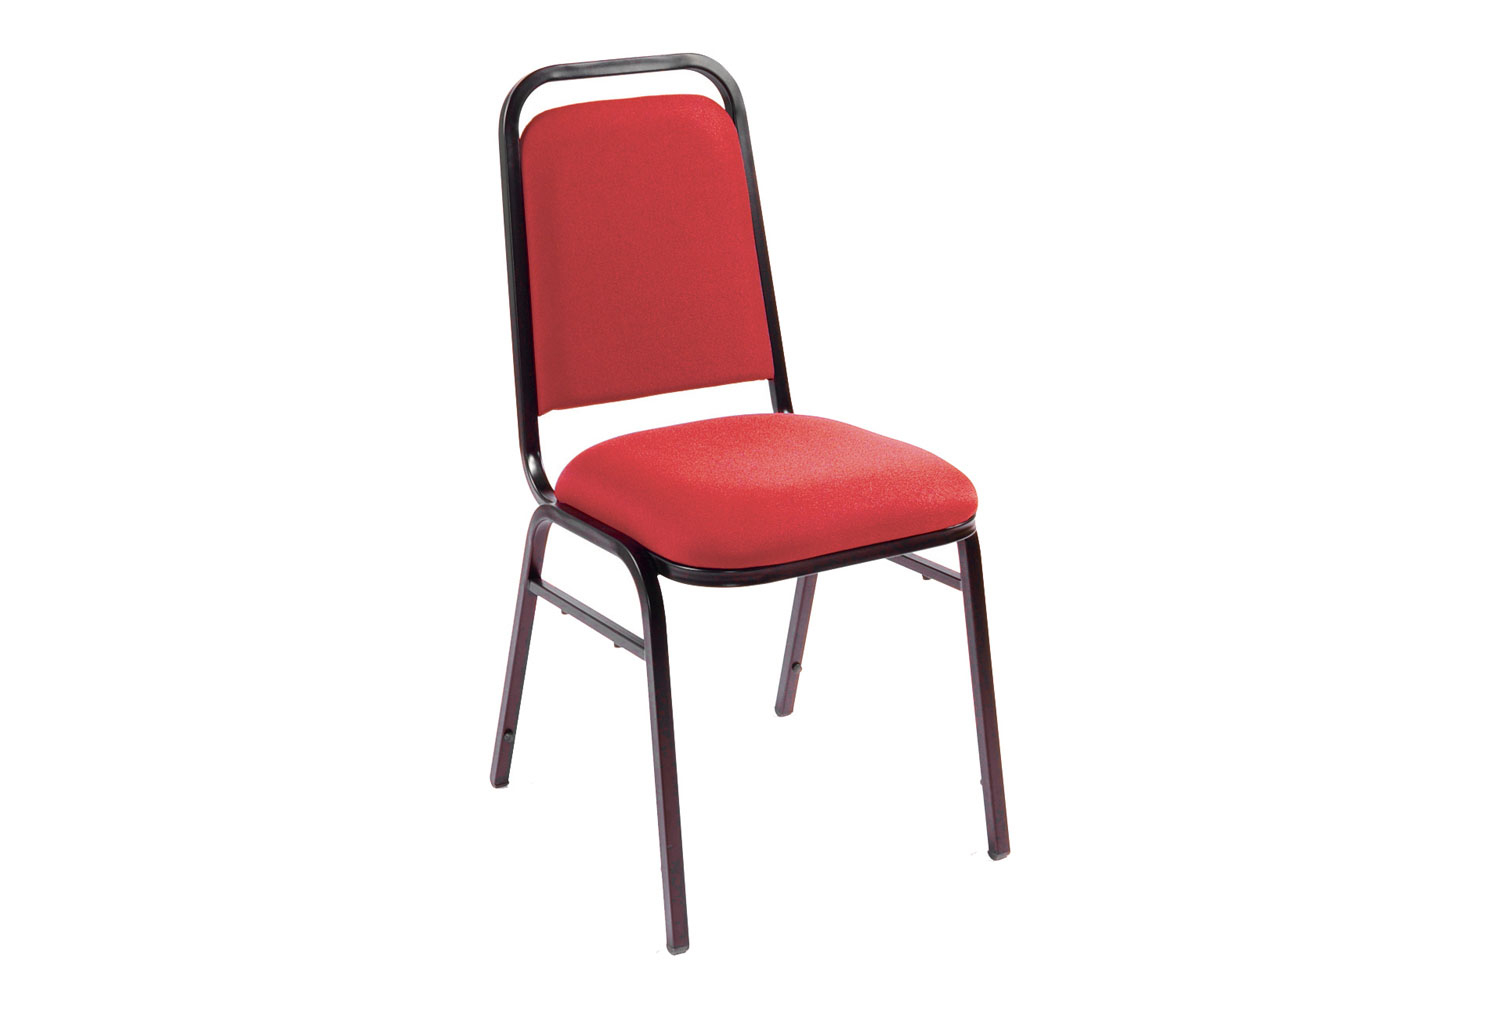 Qty 10 - Piccadilly Banquet Office Chair, Silver Frame, Red